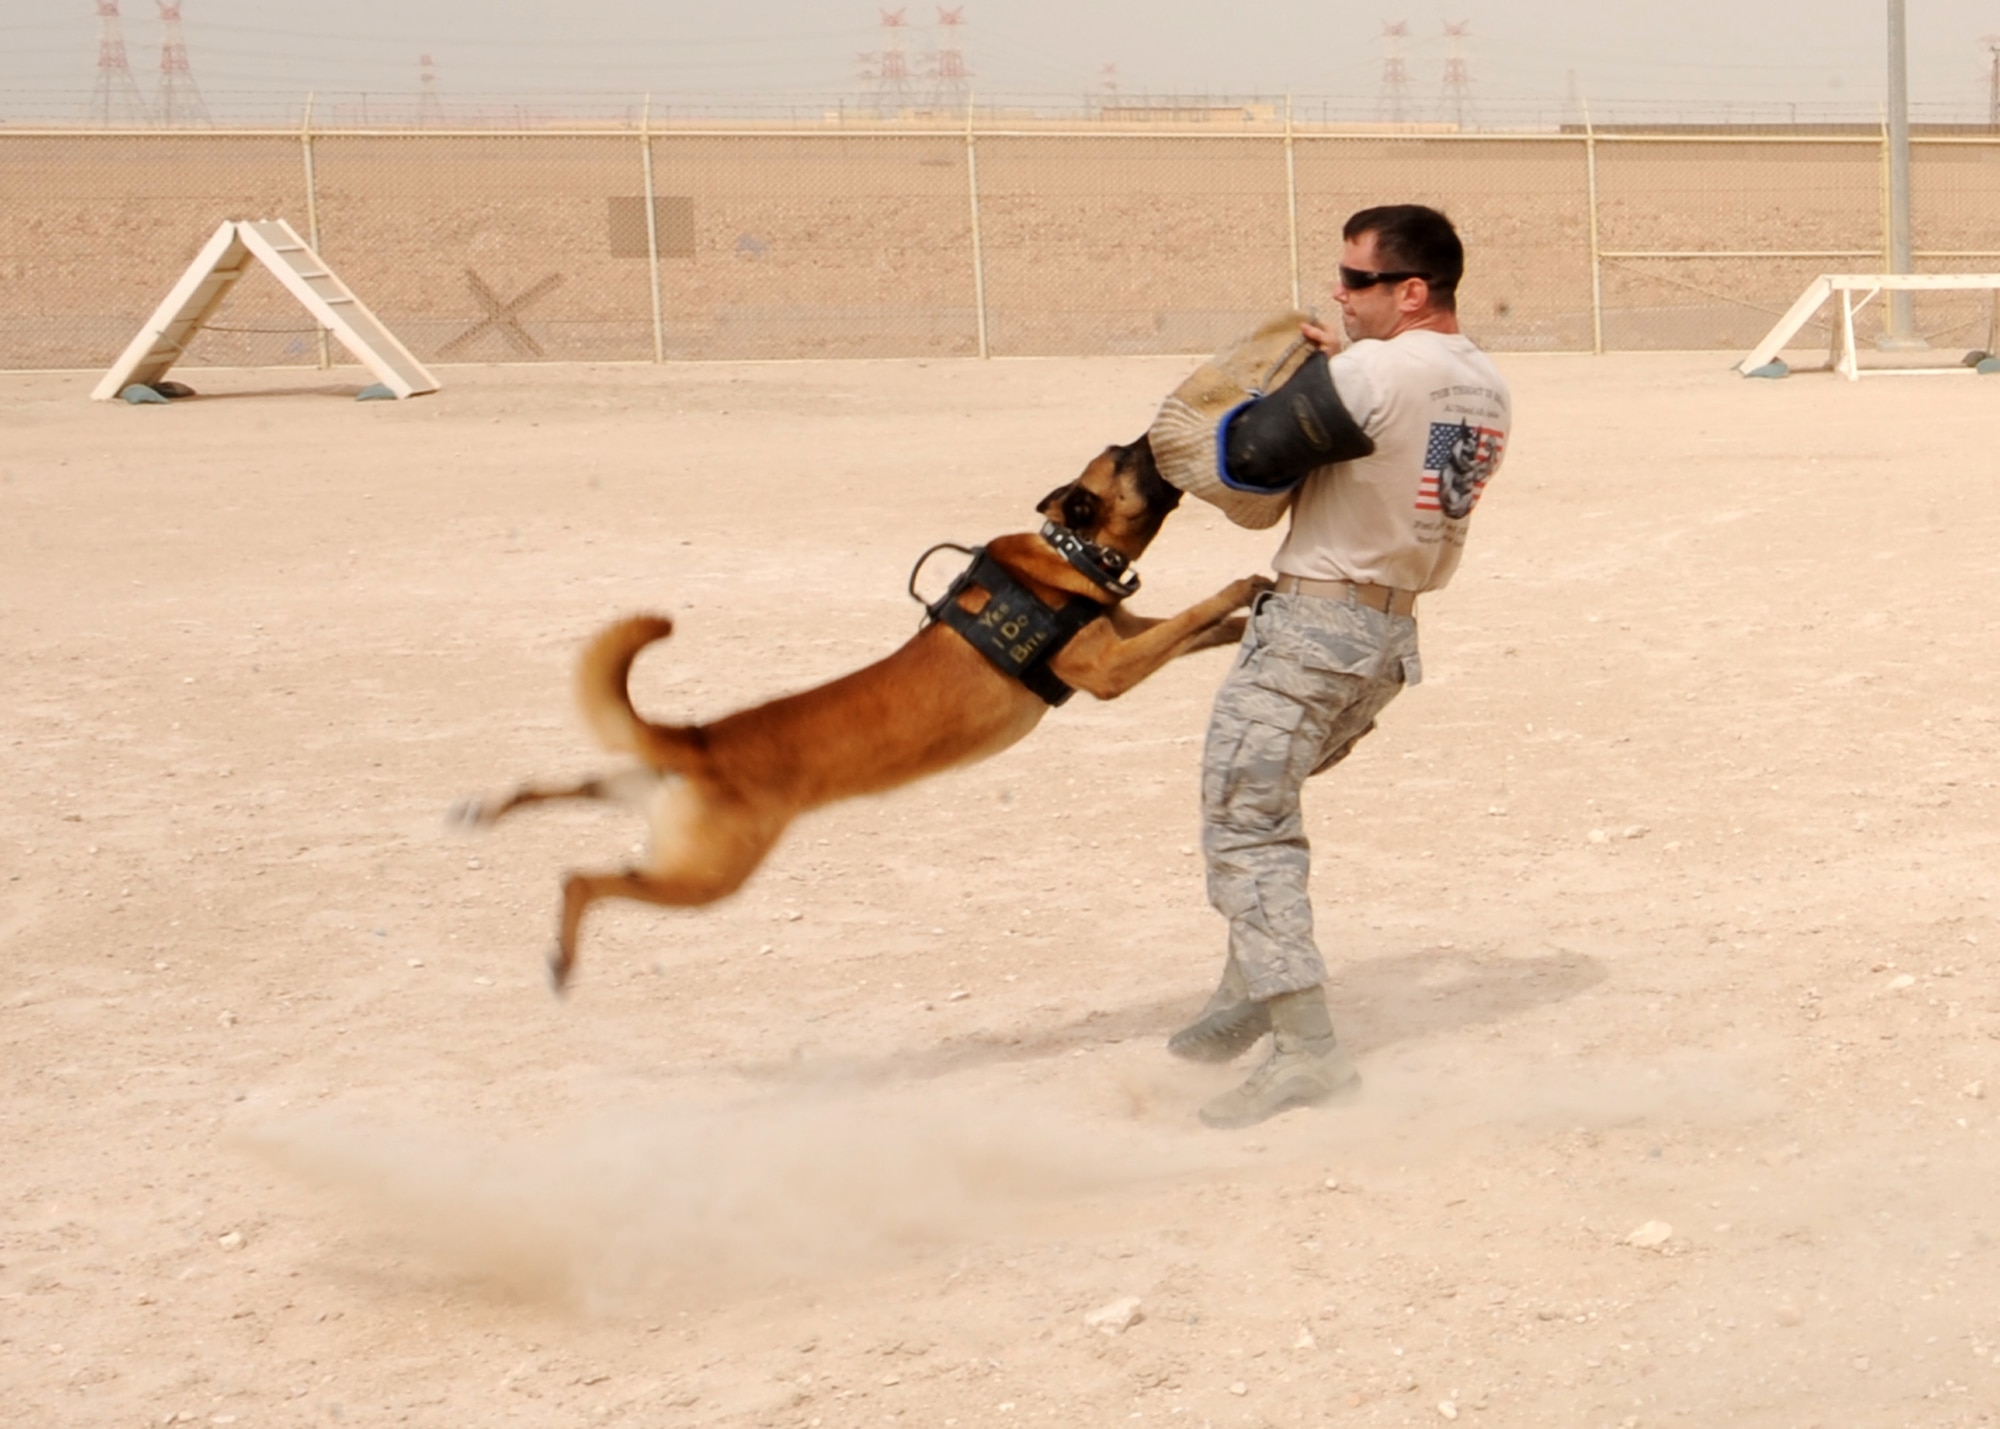 SOUTHWEST ASIA - Tech. Sgt. David Helmbrecht, 379th Expeditionary Security Forces Squadron kennel master, swings Nico after the military working dog successfully attacks the bite sleeve in the obedience yard, April 23. Because of Nico’s weight and the force of his momentum when he attacks, dog handlers swing him when they wear the bite suit to help prevent Nico from injuring himself. Helmbrecht is deployed from Grand Forks Air Force Base, N.D., and Nico is deployed from Travis Air Force Base, Calif. (U.S. Air Force photo/Staff Sgt. Joel Mease)